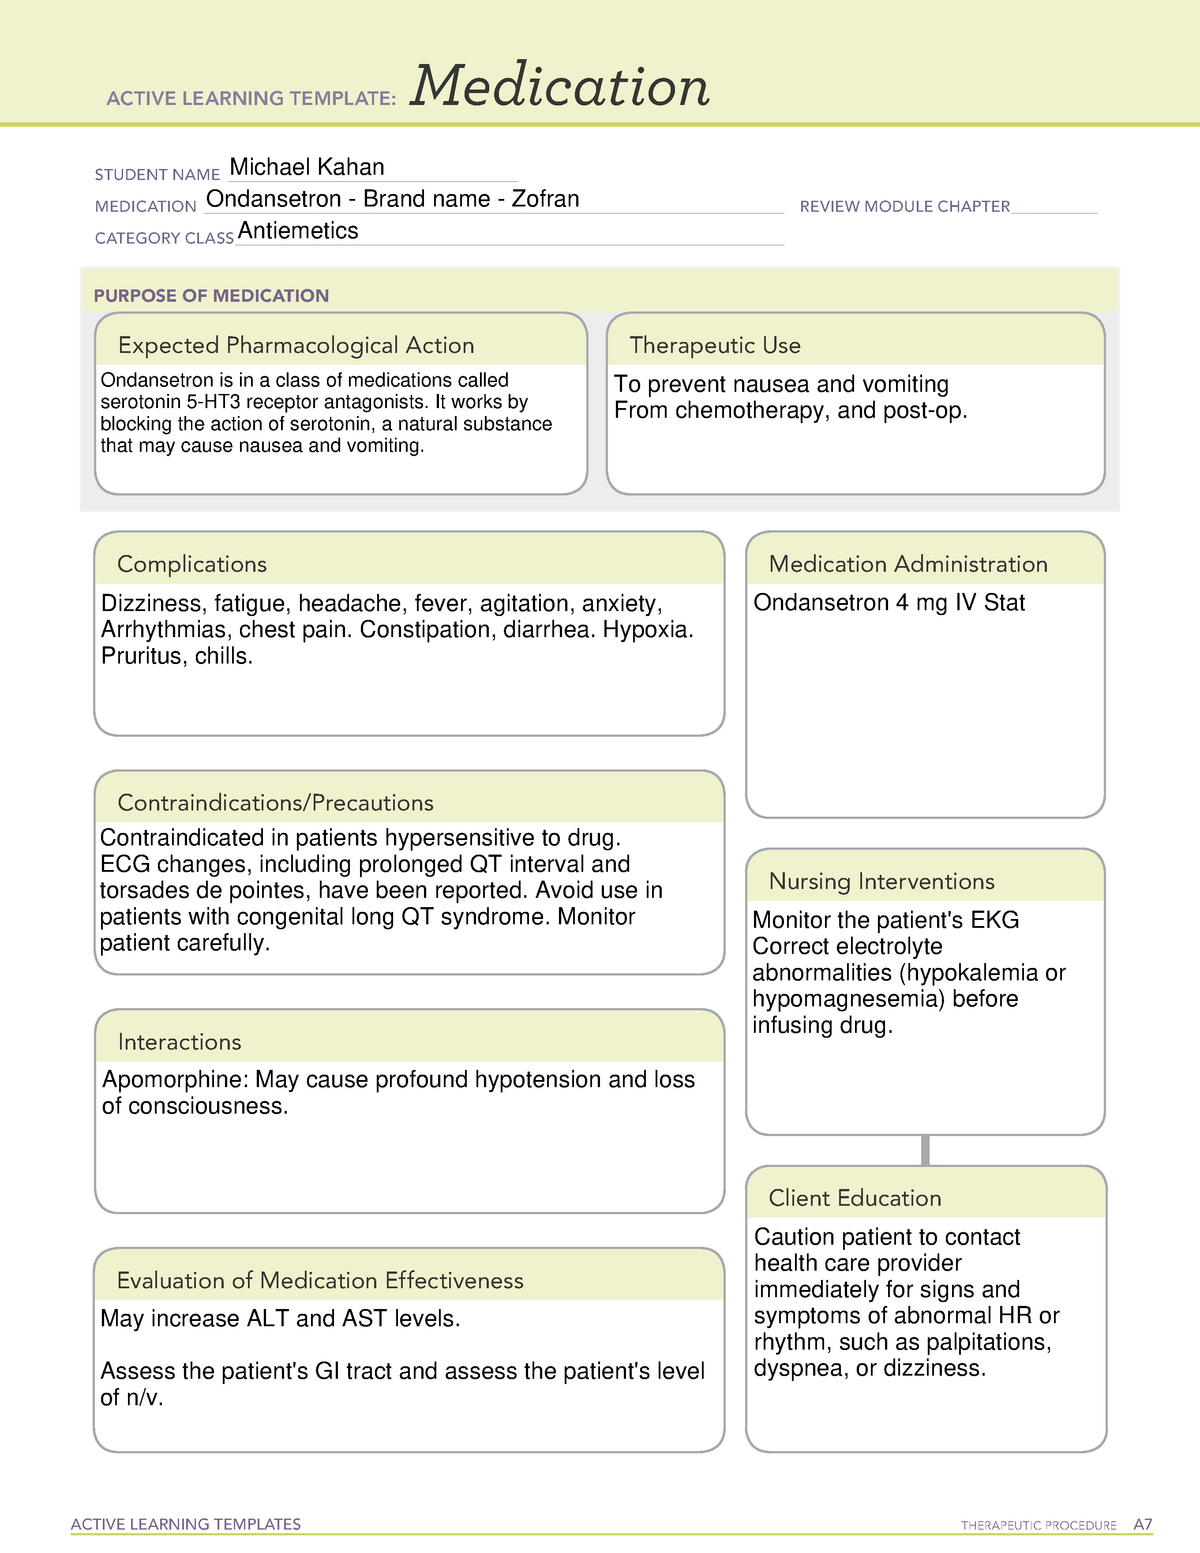 ondansetron-ati-active-learning-templates-therapeutic-procedure-a-medication-student-name